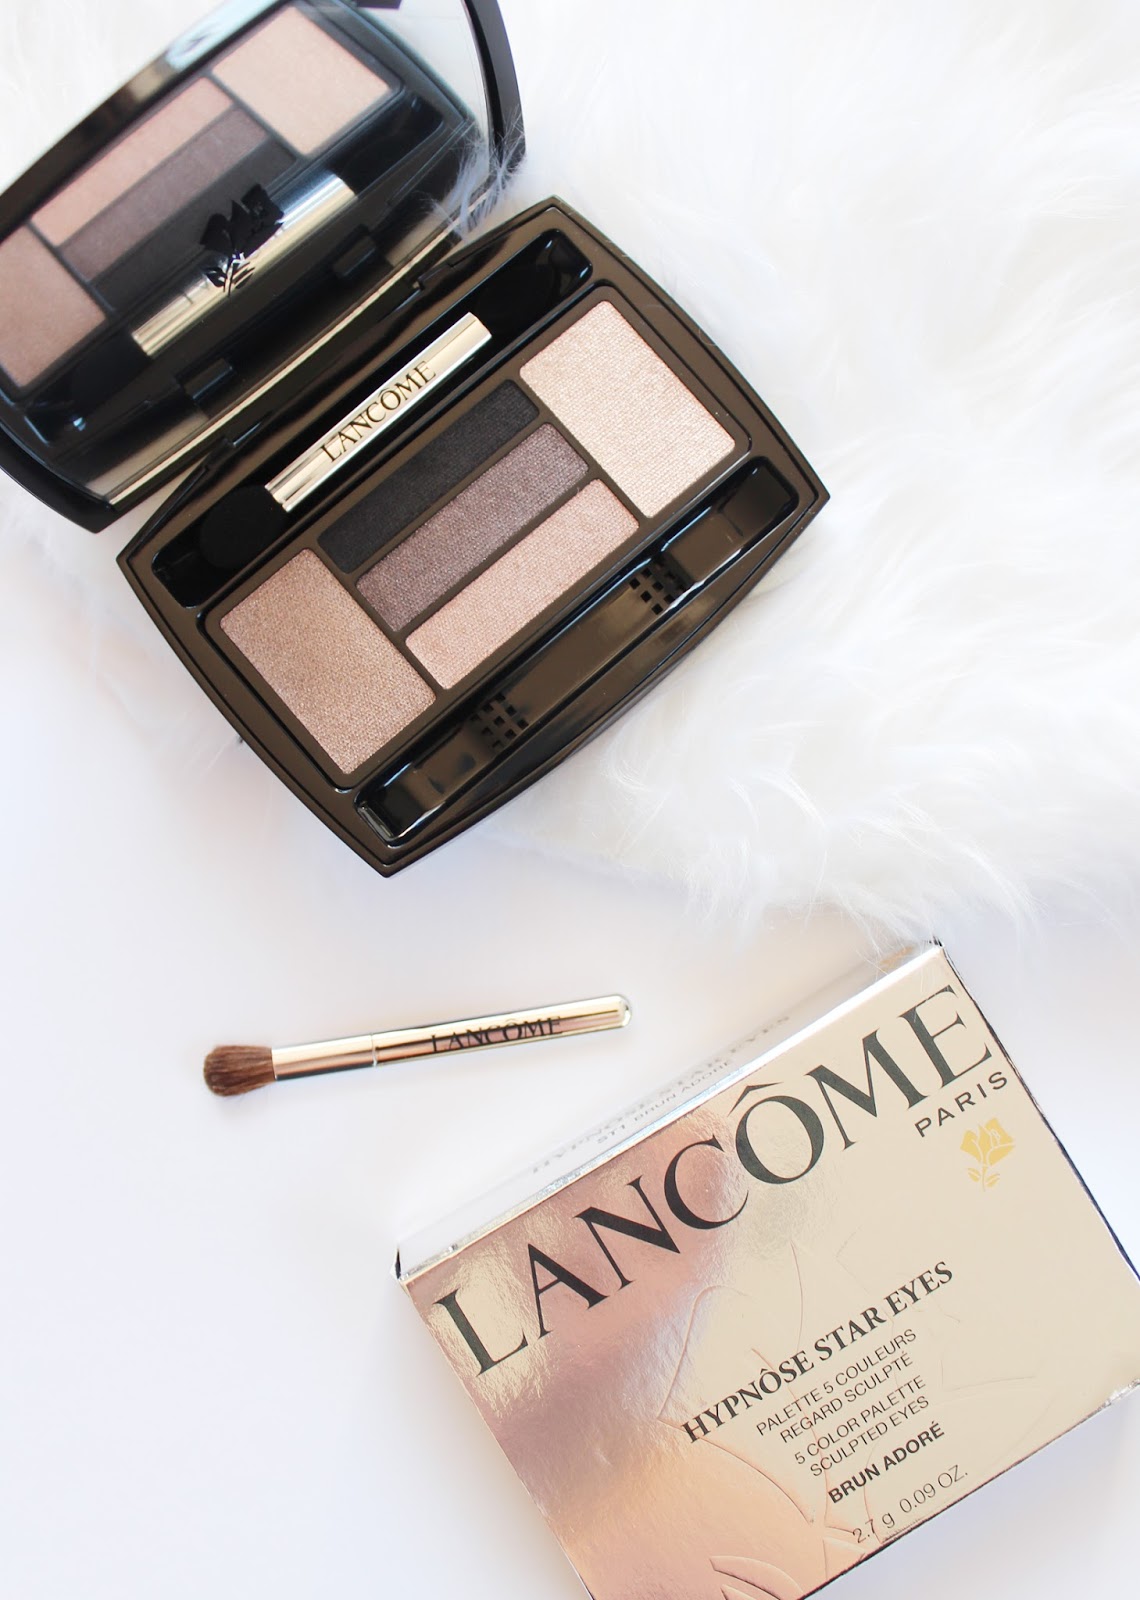 LANCOME | Hypnose Star Eyes 5 Color Palette in Brun Adore - Review + Swatches - CassandraMyee